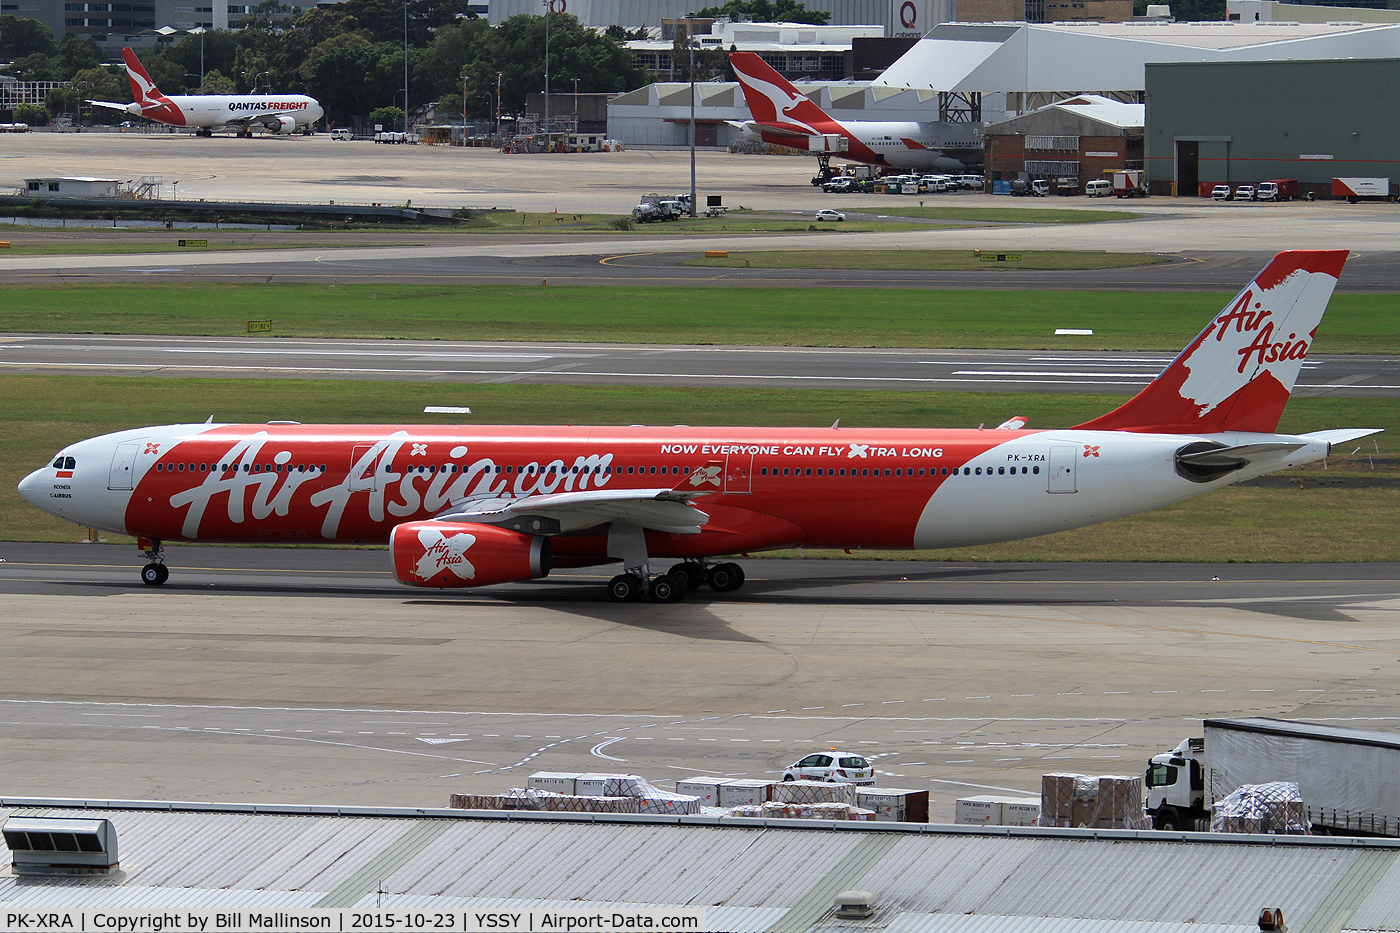 PK-XRA, 2005 Airbus A330-343X C/N 716, taxiing to 16R